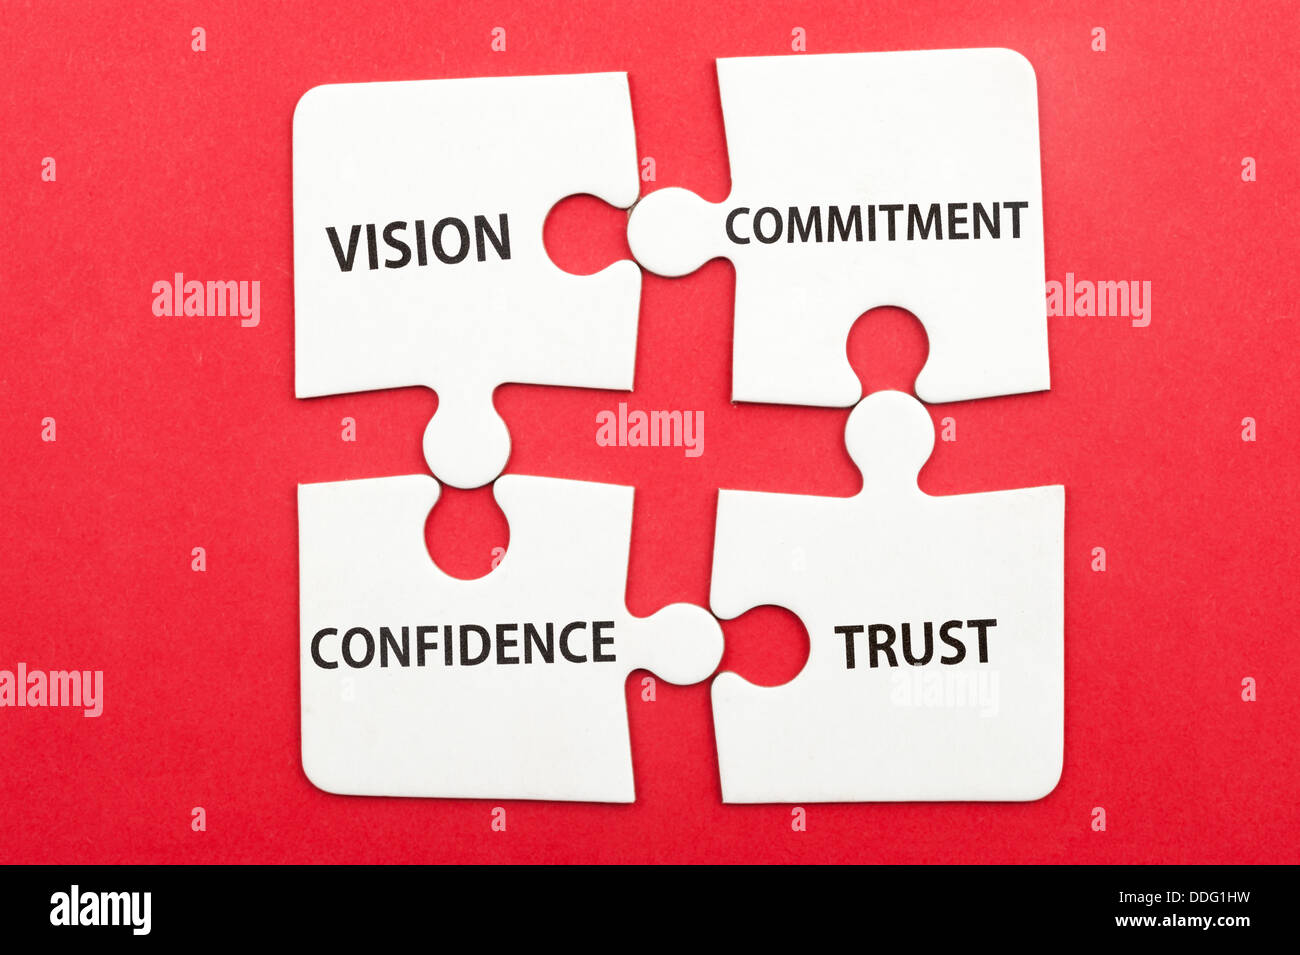 Business teamwork concept of vision, commitment, confidence, trust written on group of jigsaw puzzle pieces Stock Photo